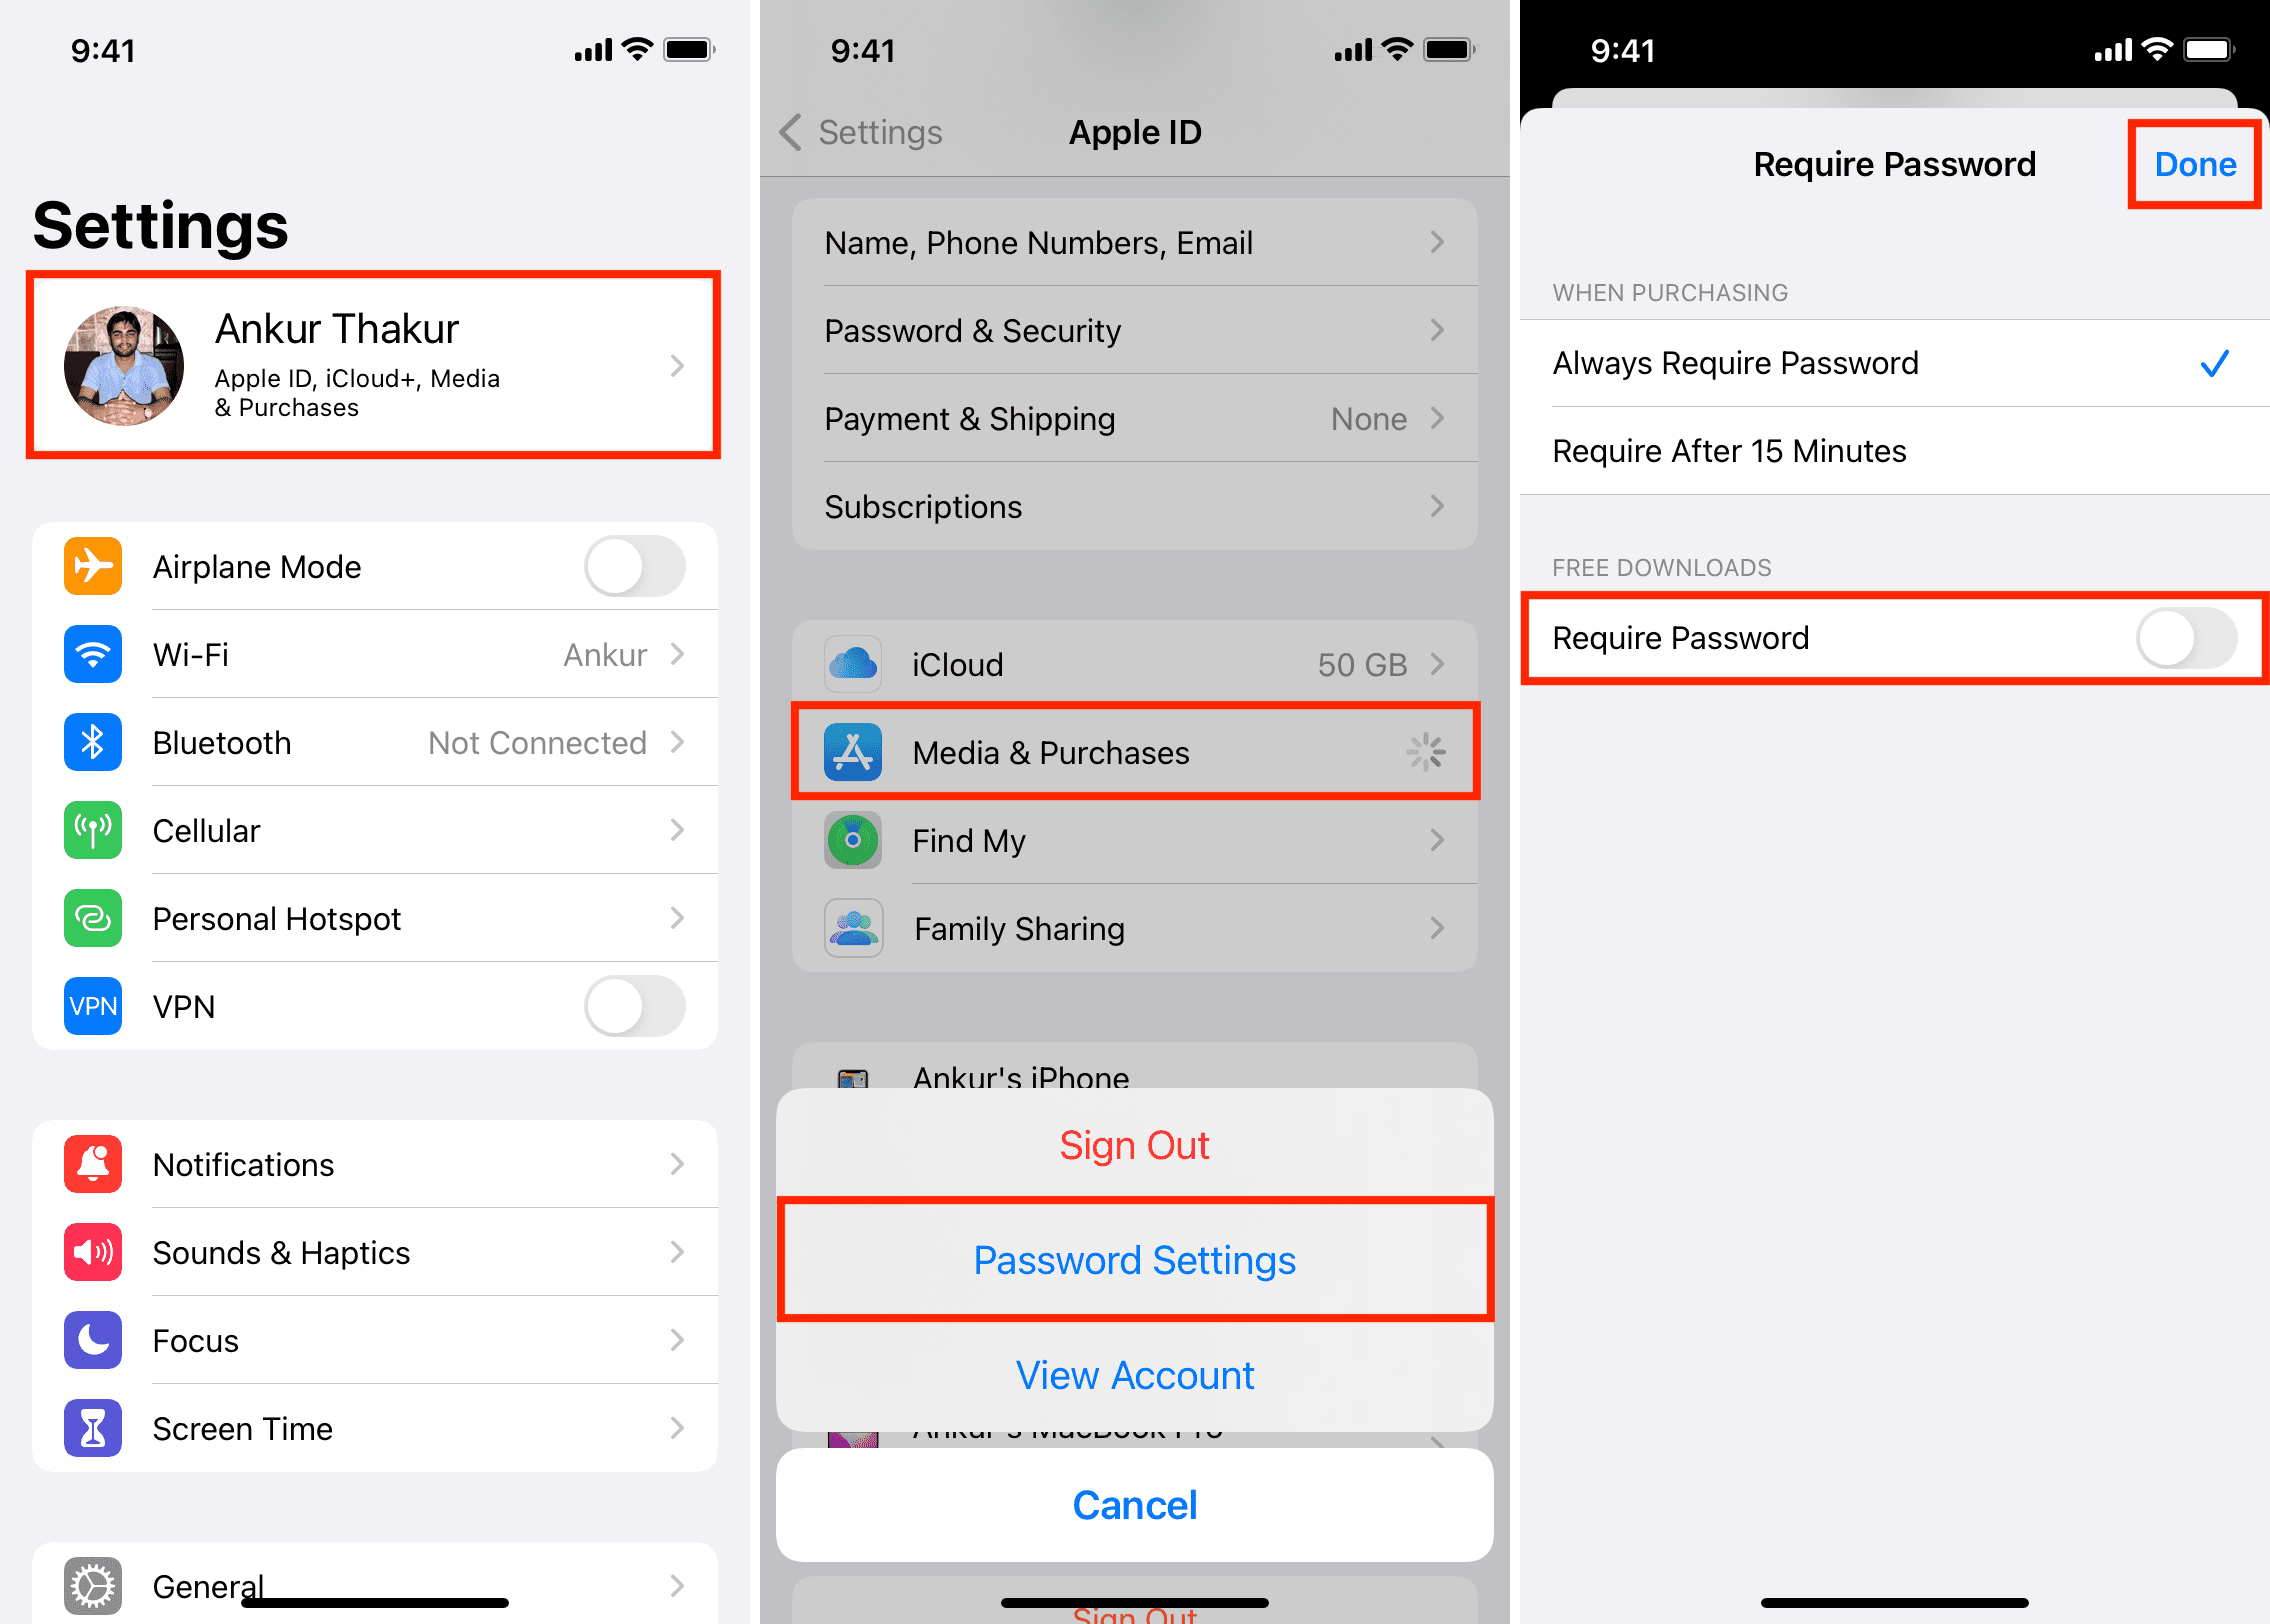 Turn off Require Password for free apps on iPhone App Store